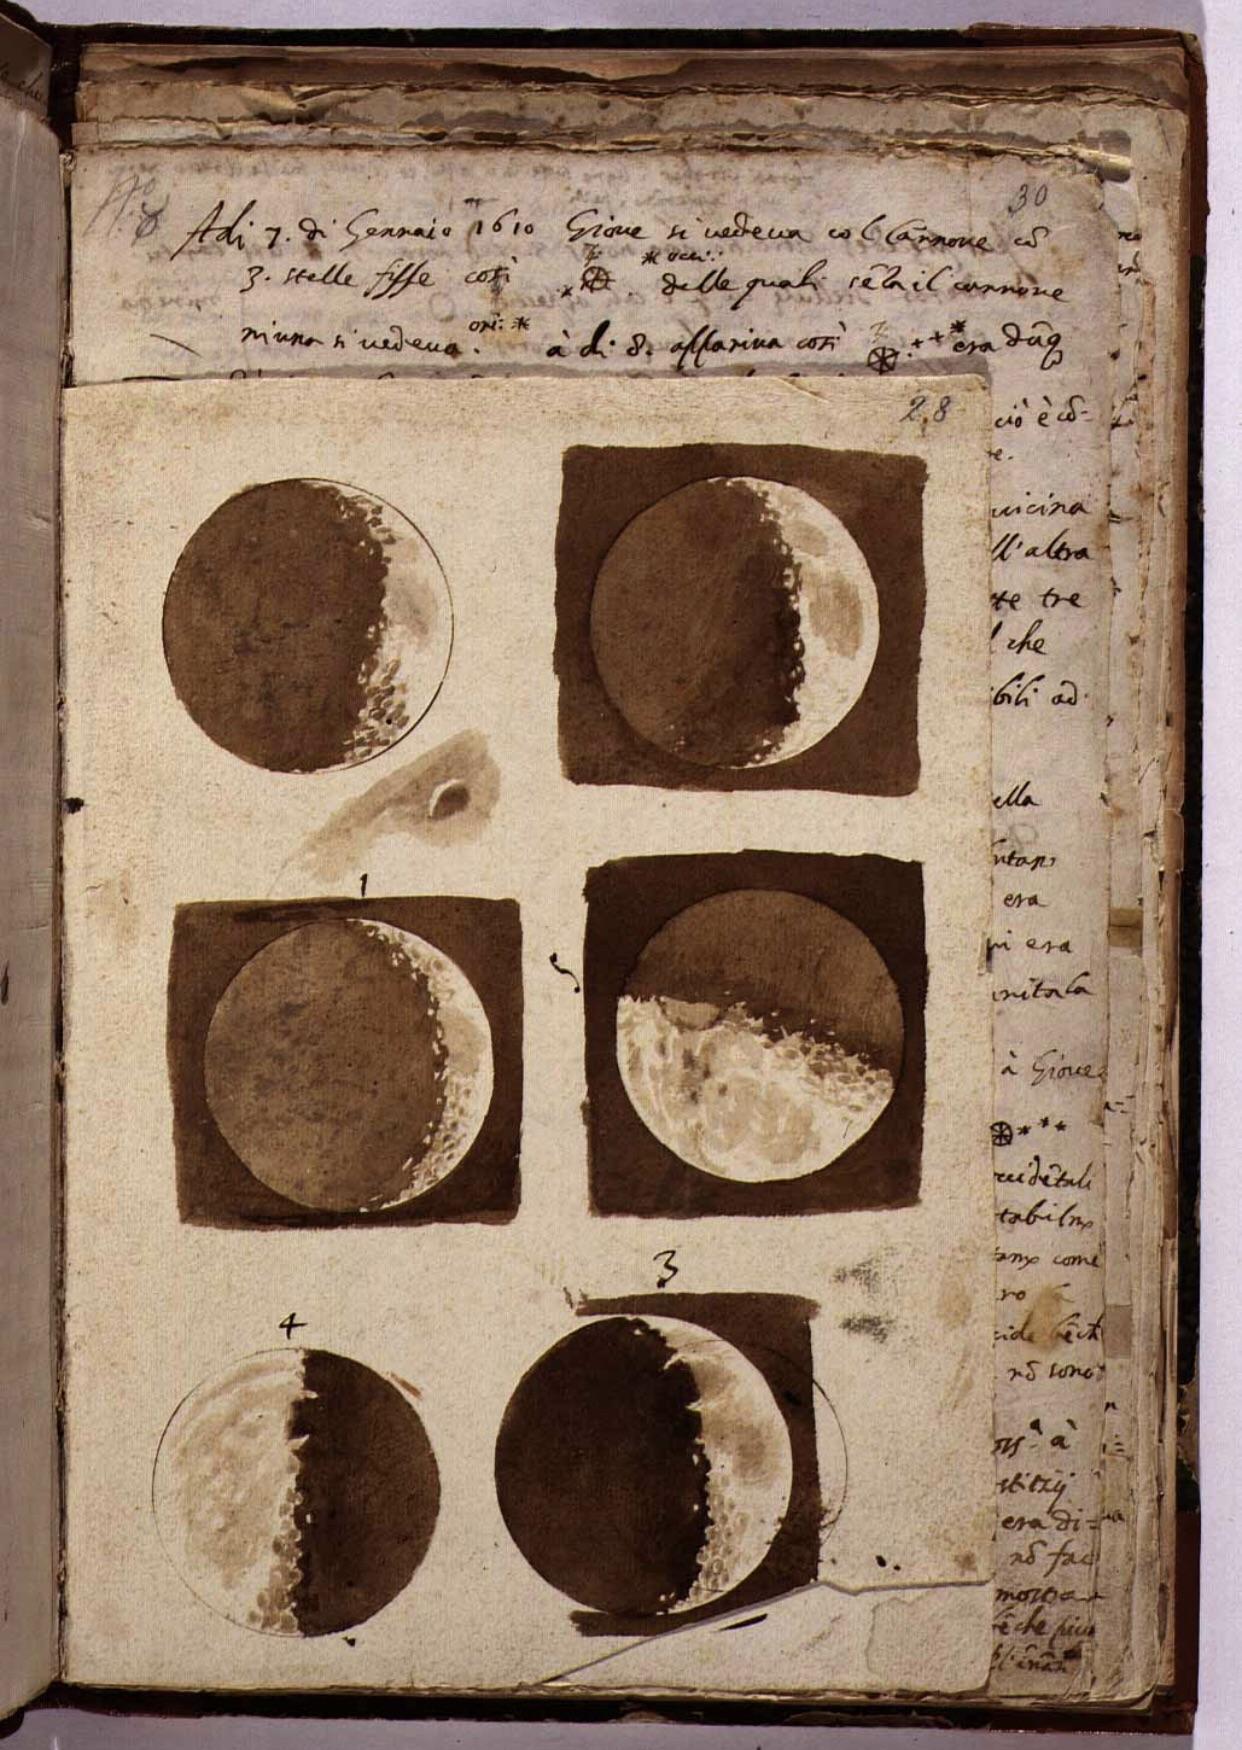 Galileo%26%238217%3Bs+drawings+of+the+moon+1610